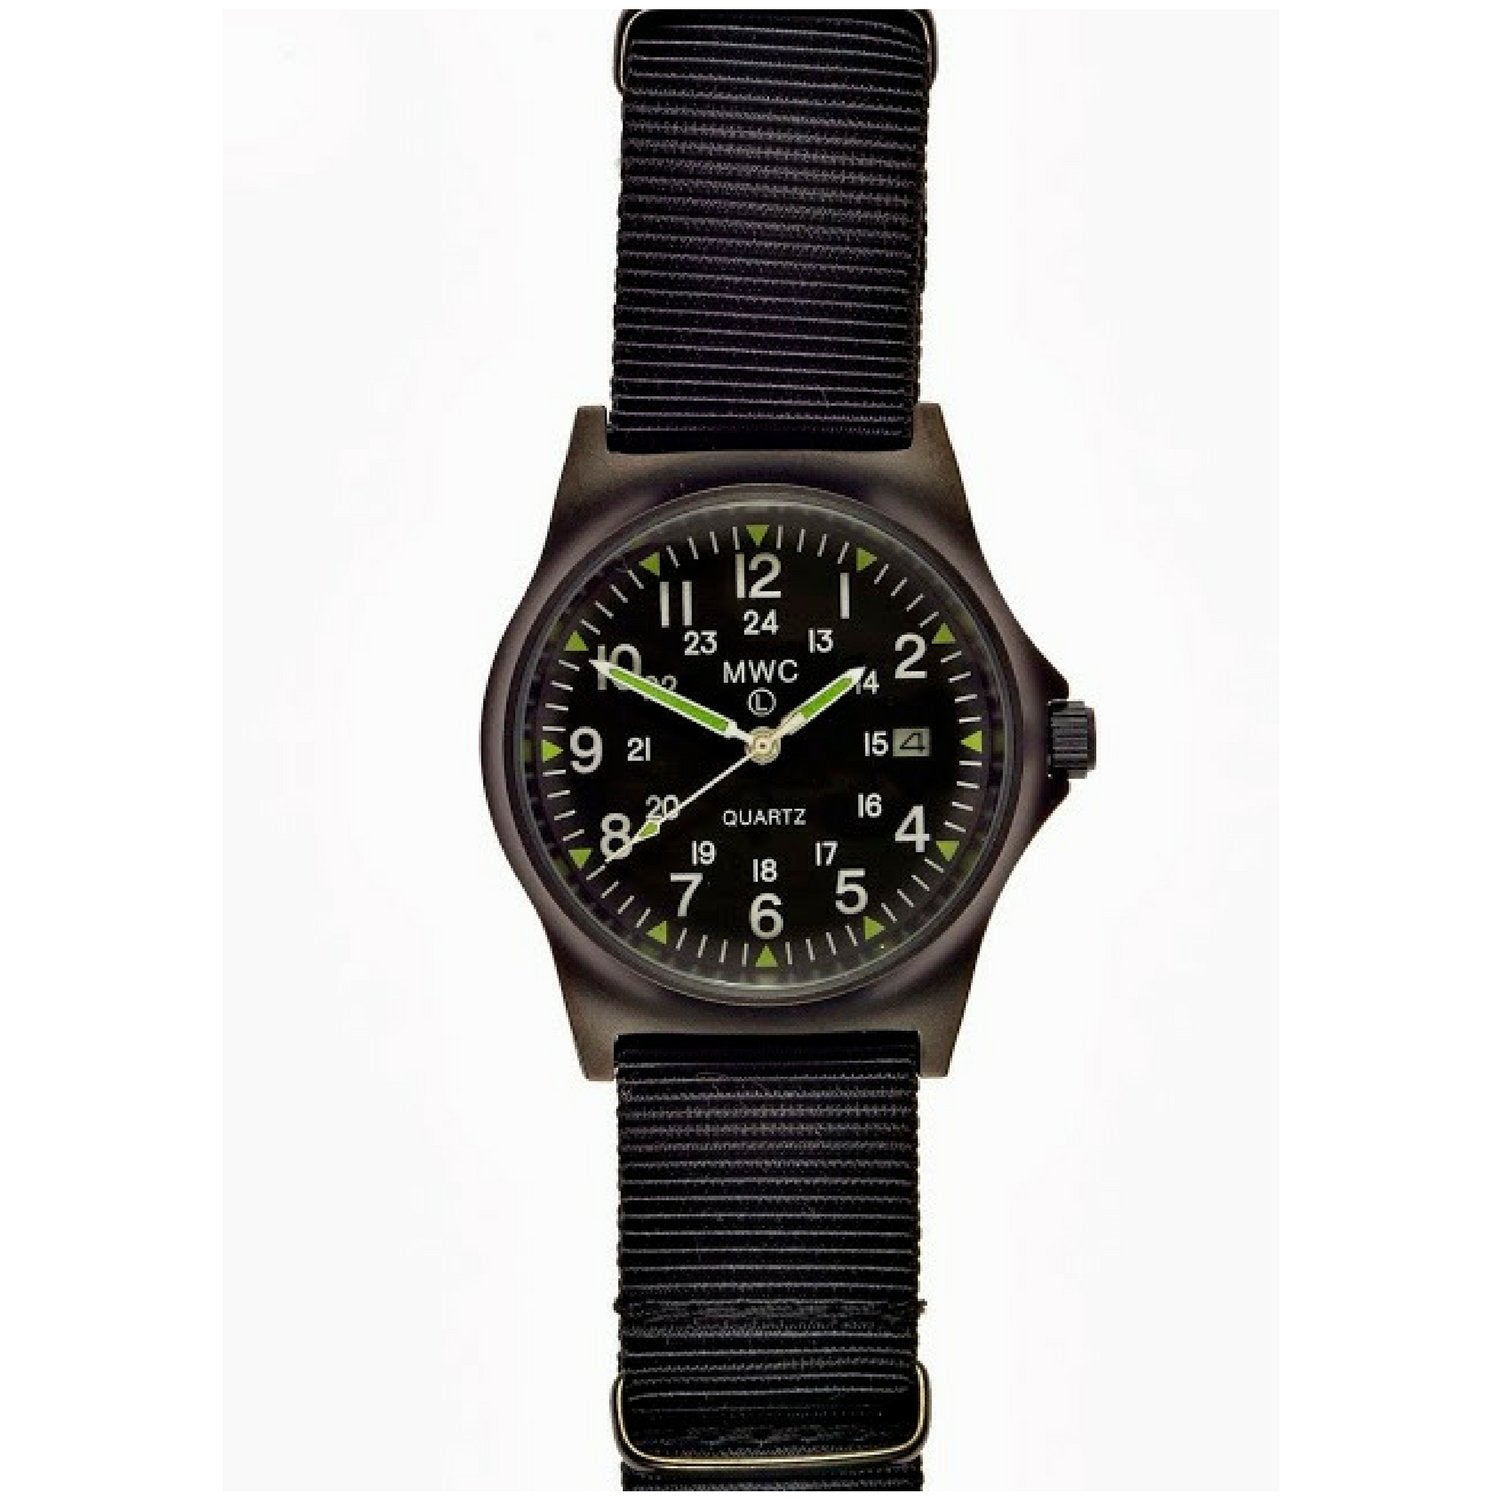 MWC G10 LM Military Watch PVD 12/24 Dial